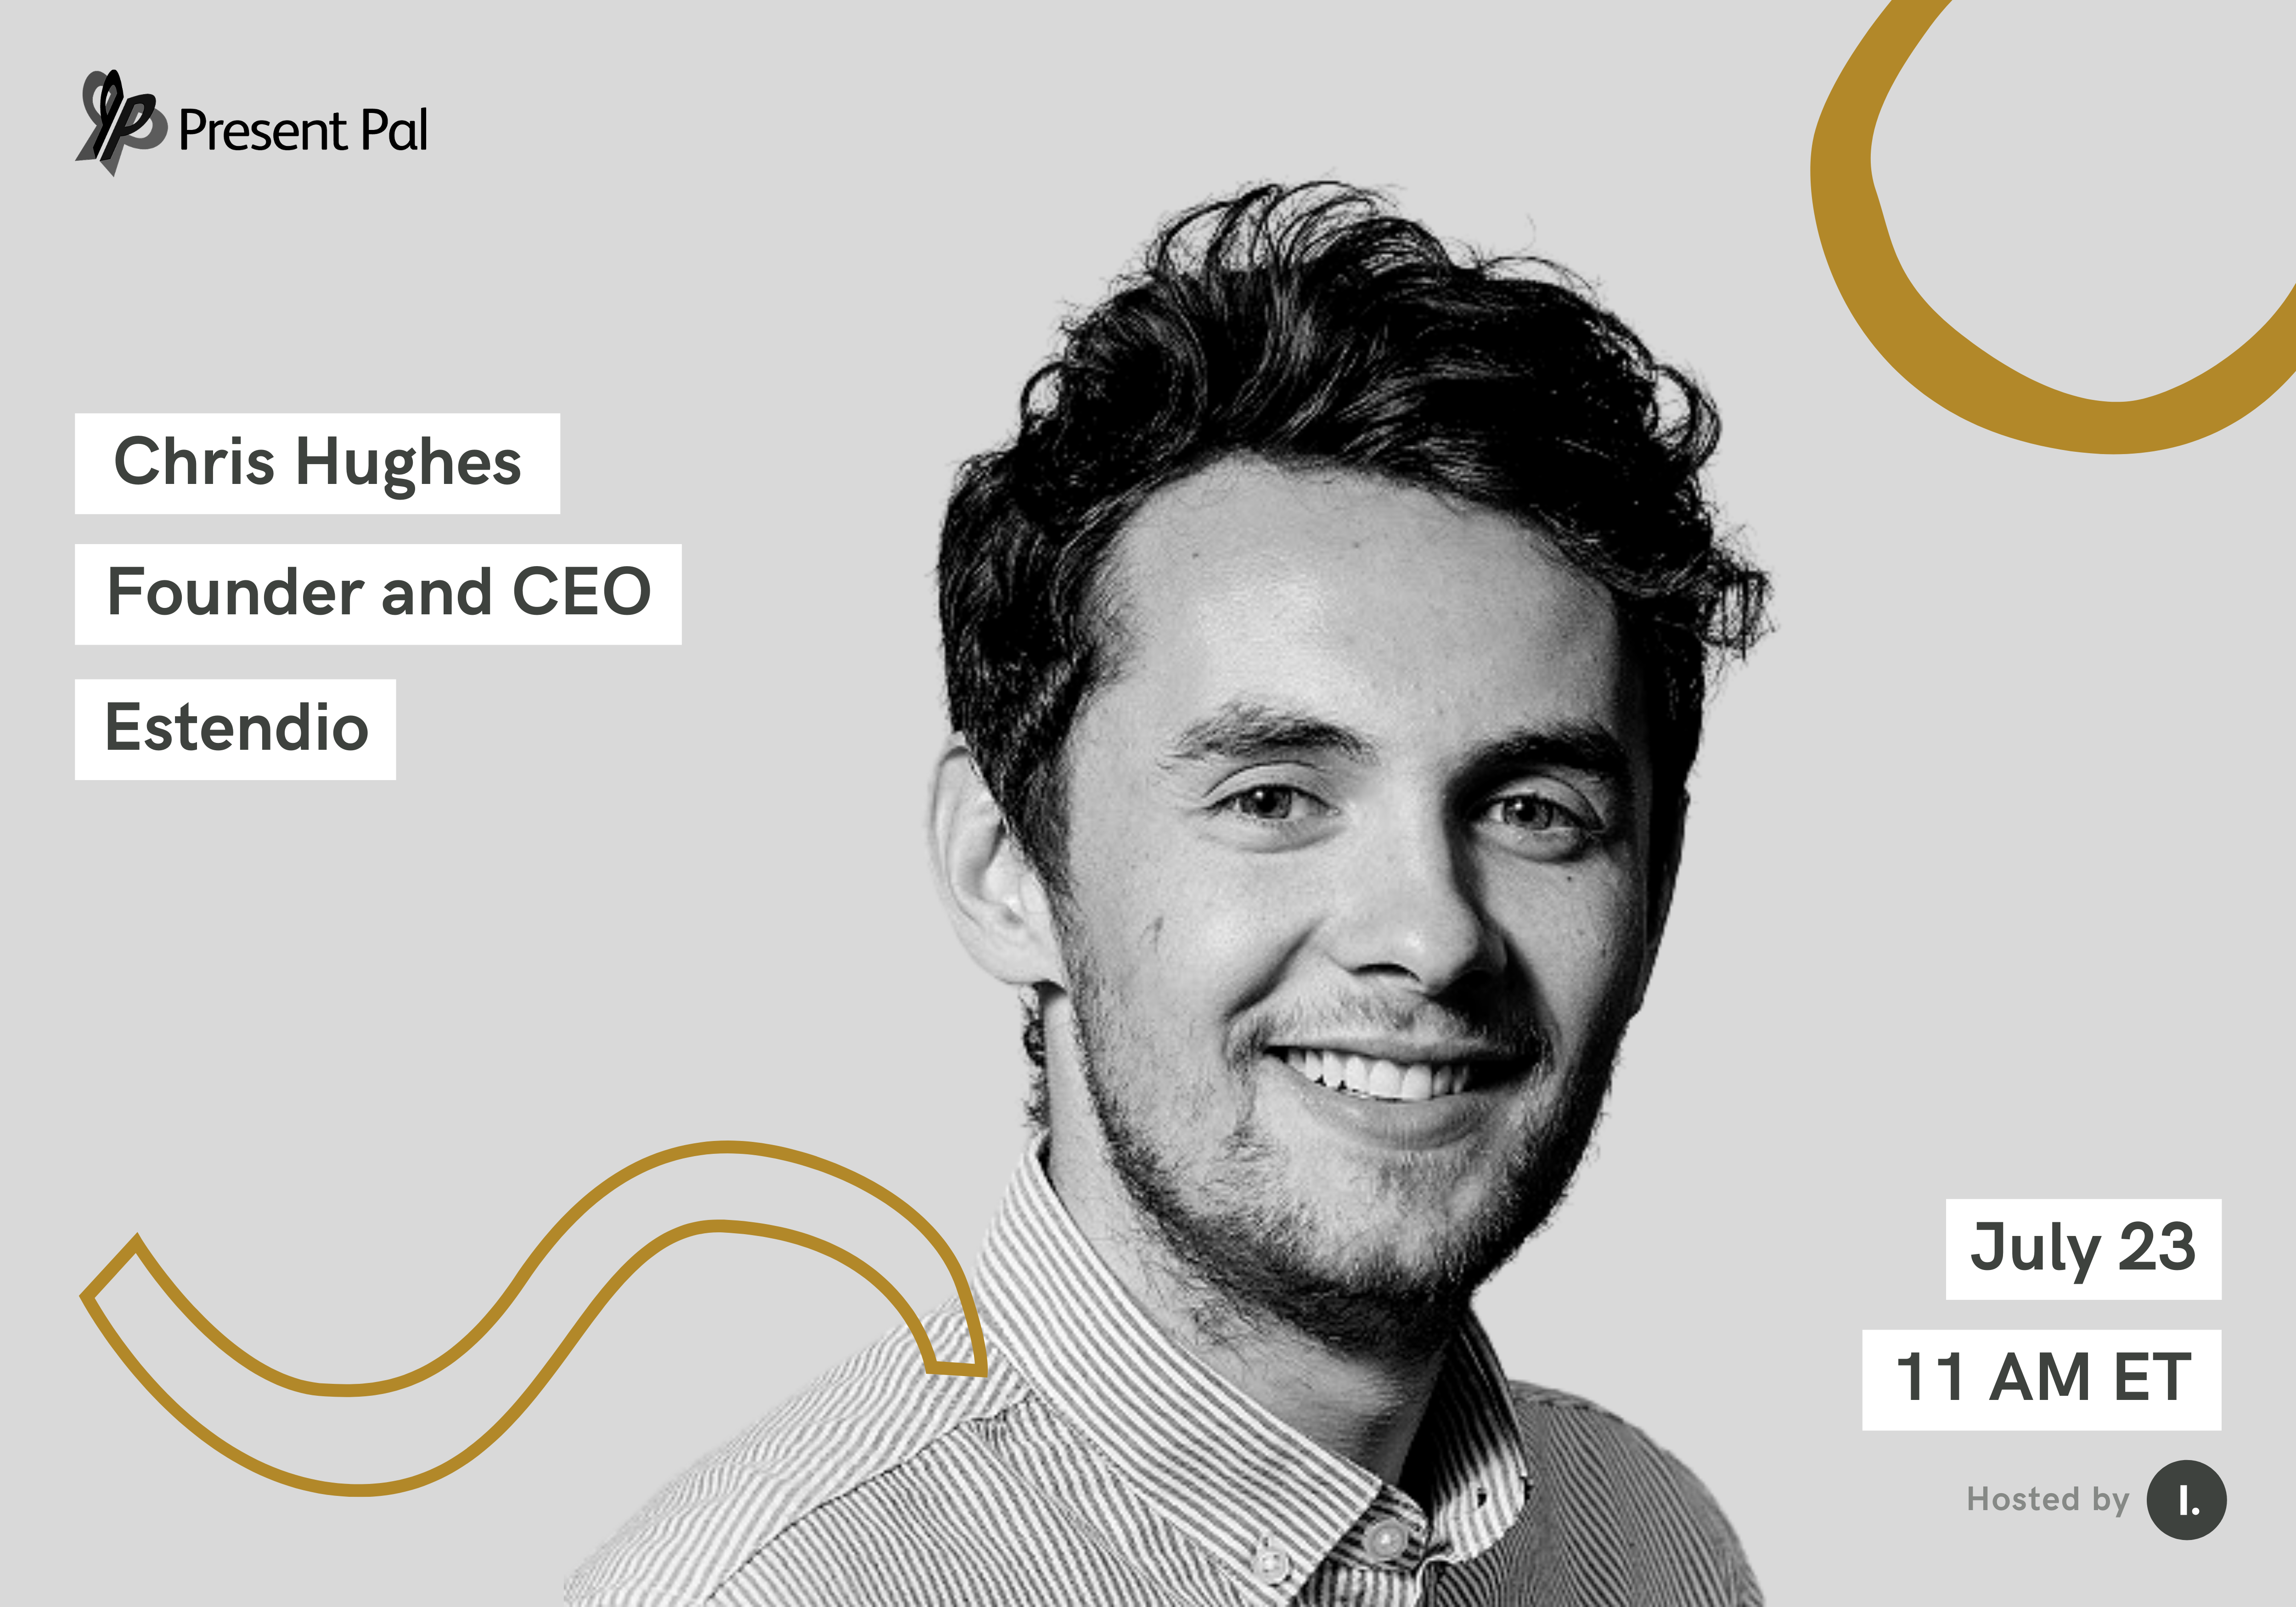 Chris Hughes, a young white man, faces the camera and smiles. He is wearing a striped button-down shirt, and event details have been superimposed on the image. He is the founder and CEO of Present Pal, speaking for our Makers series on July 23rd at 11 AM Eastern Time. The Illimitable logo is in the bottom right corner and the Present Pal logo is in the top left corner. Image links to the registration page.